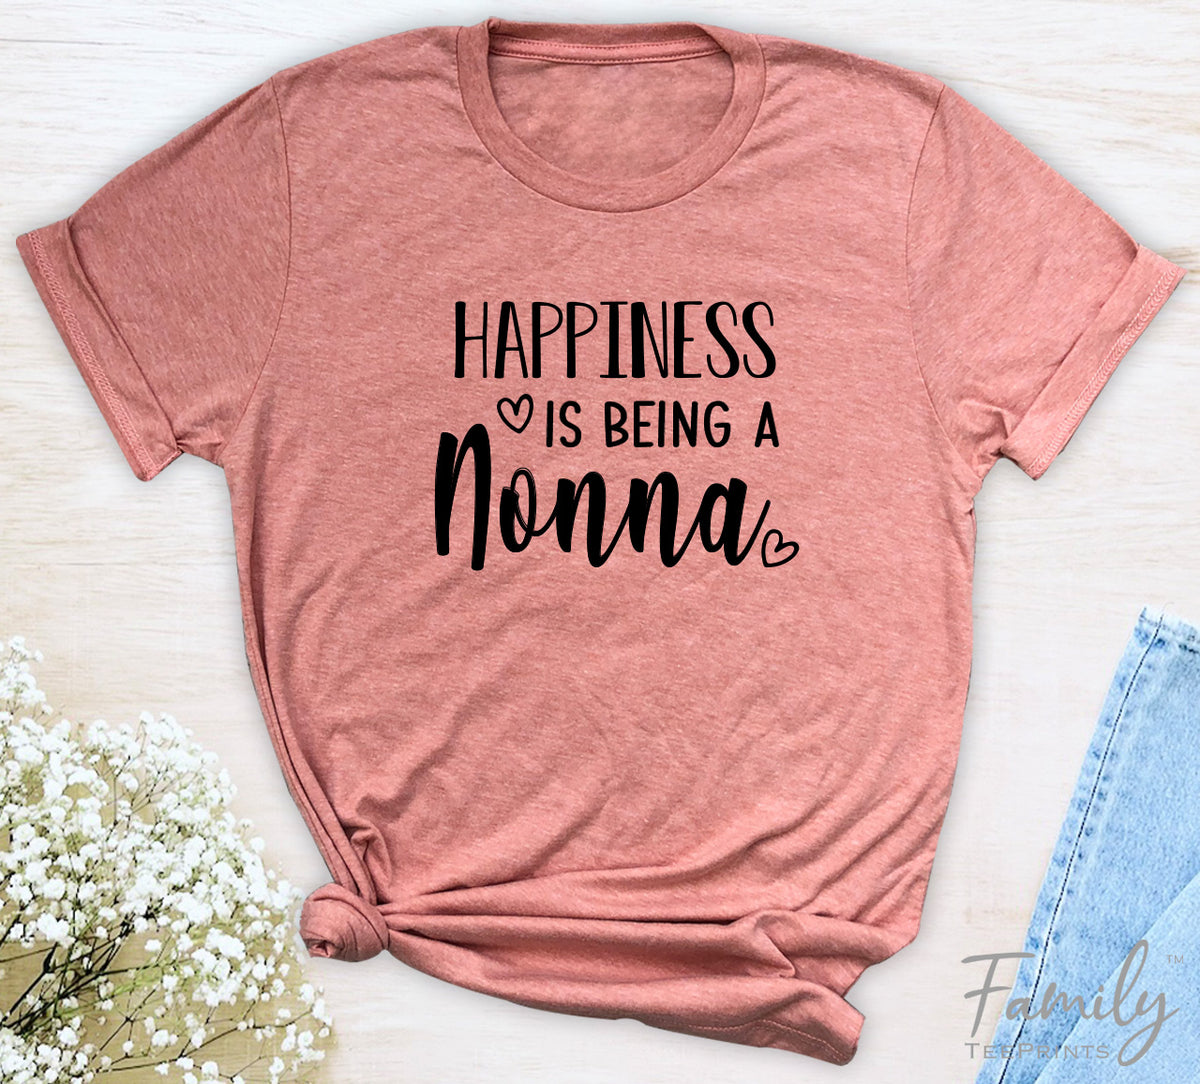 Happiness Is Being A Nonna - Unisex T-shirt - Nonna Shirt - Gift For Nonna